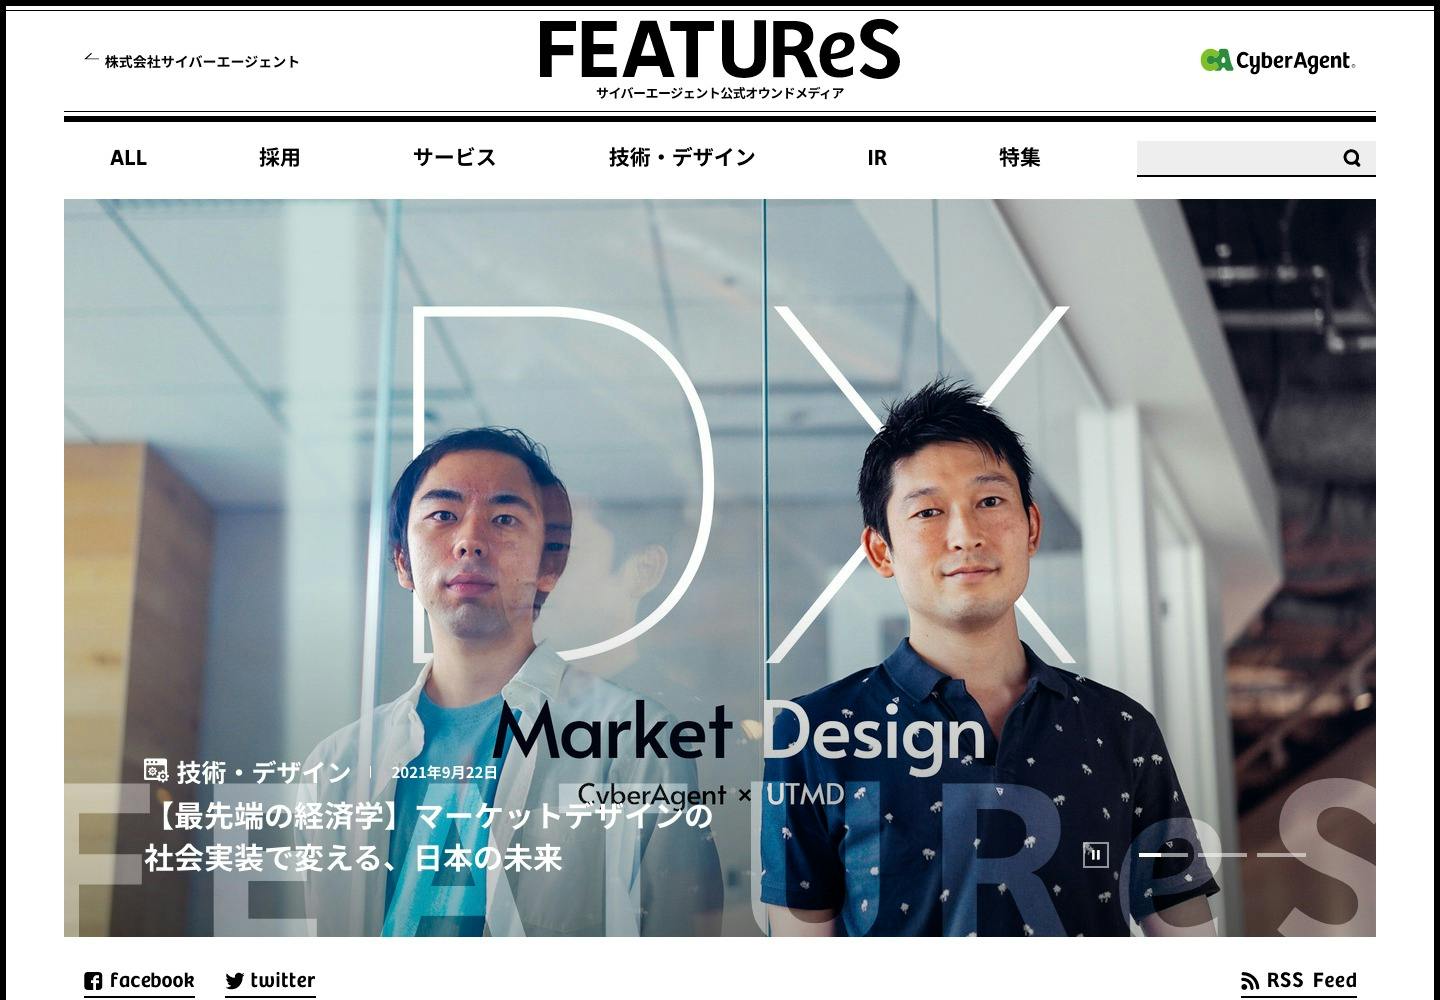 Cover Image for FEATUReS | 株式会社サイバーエージェント